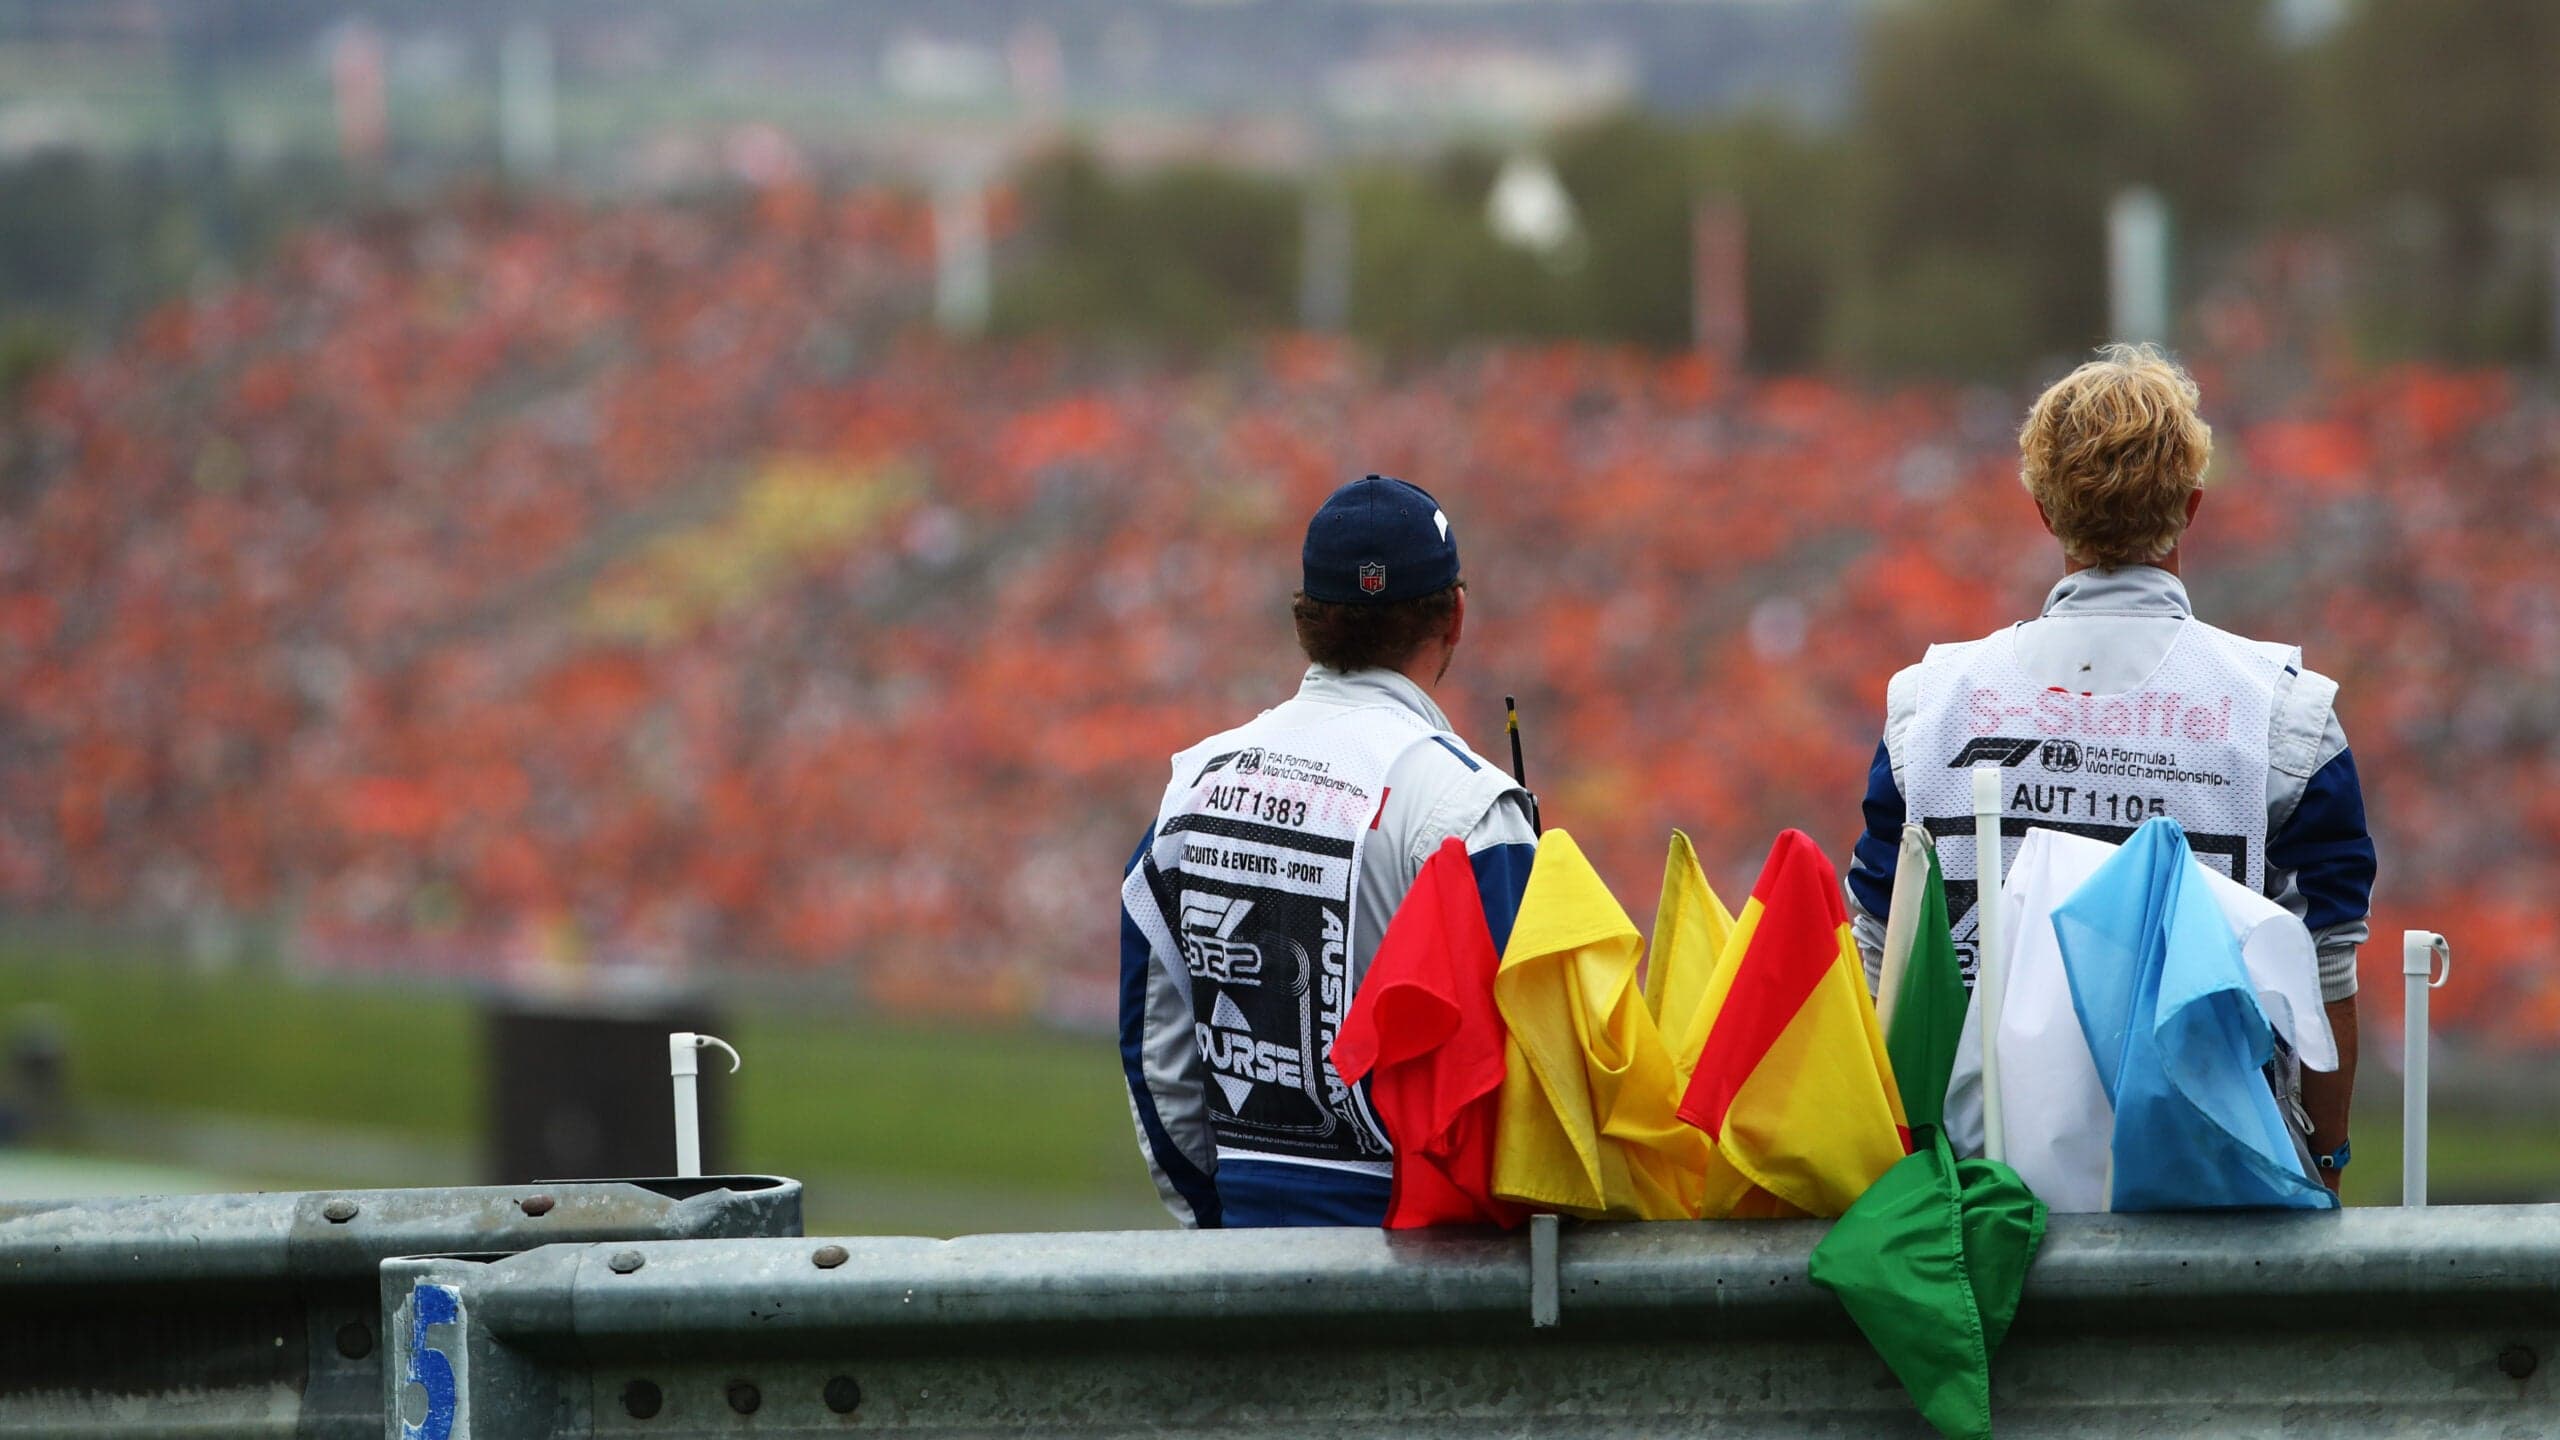 Marshals by the side of the track, with signalling flags, during the Austrian Grand Prix